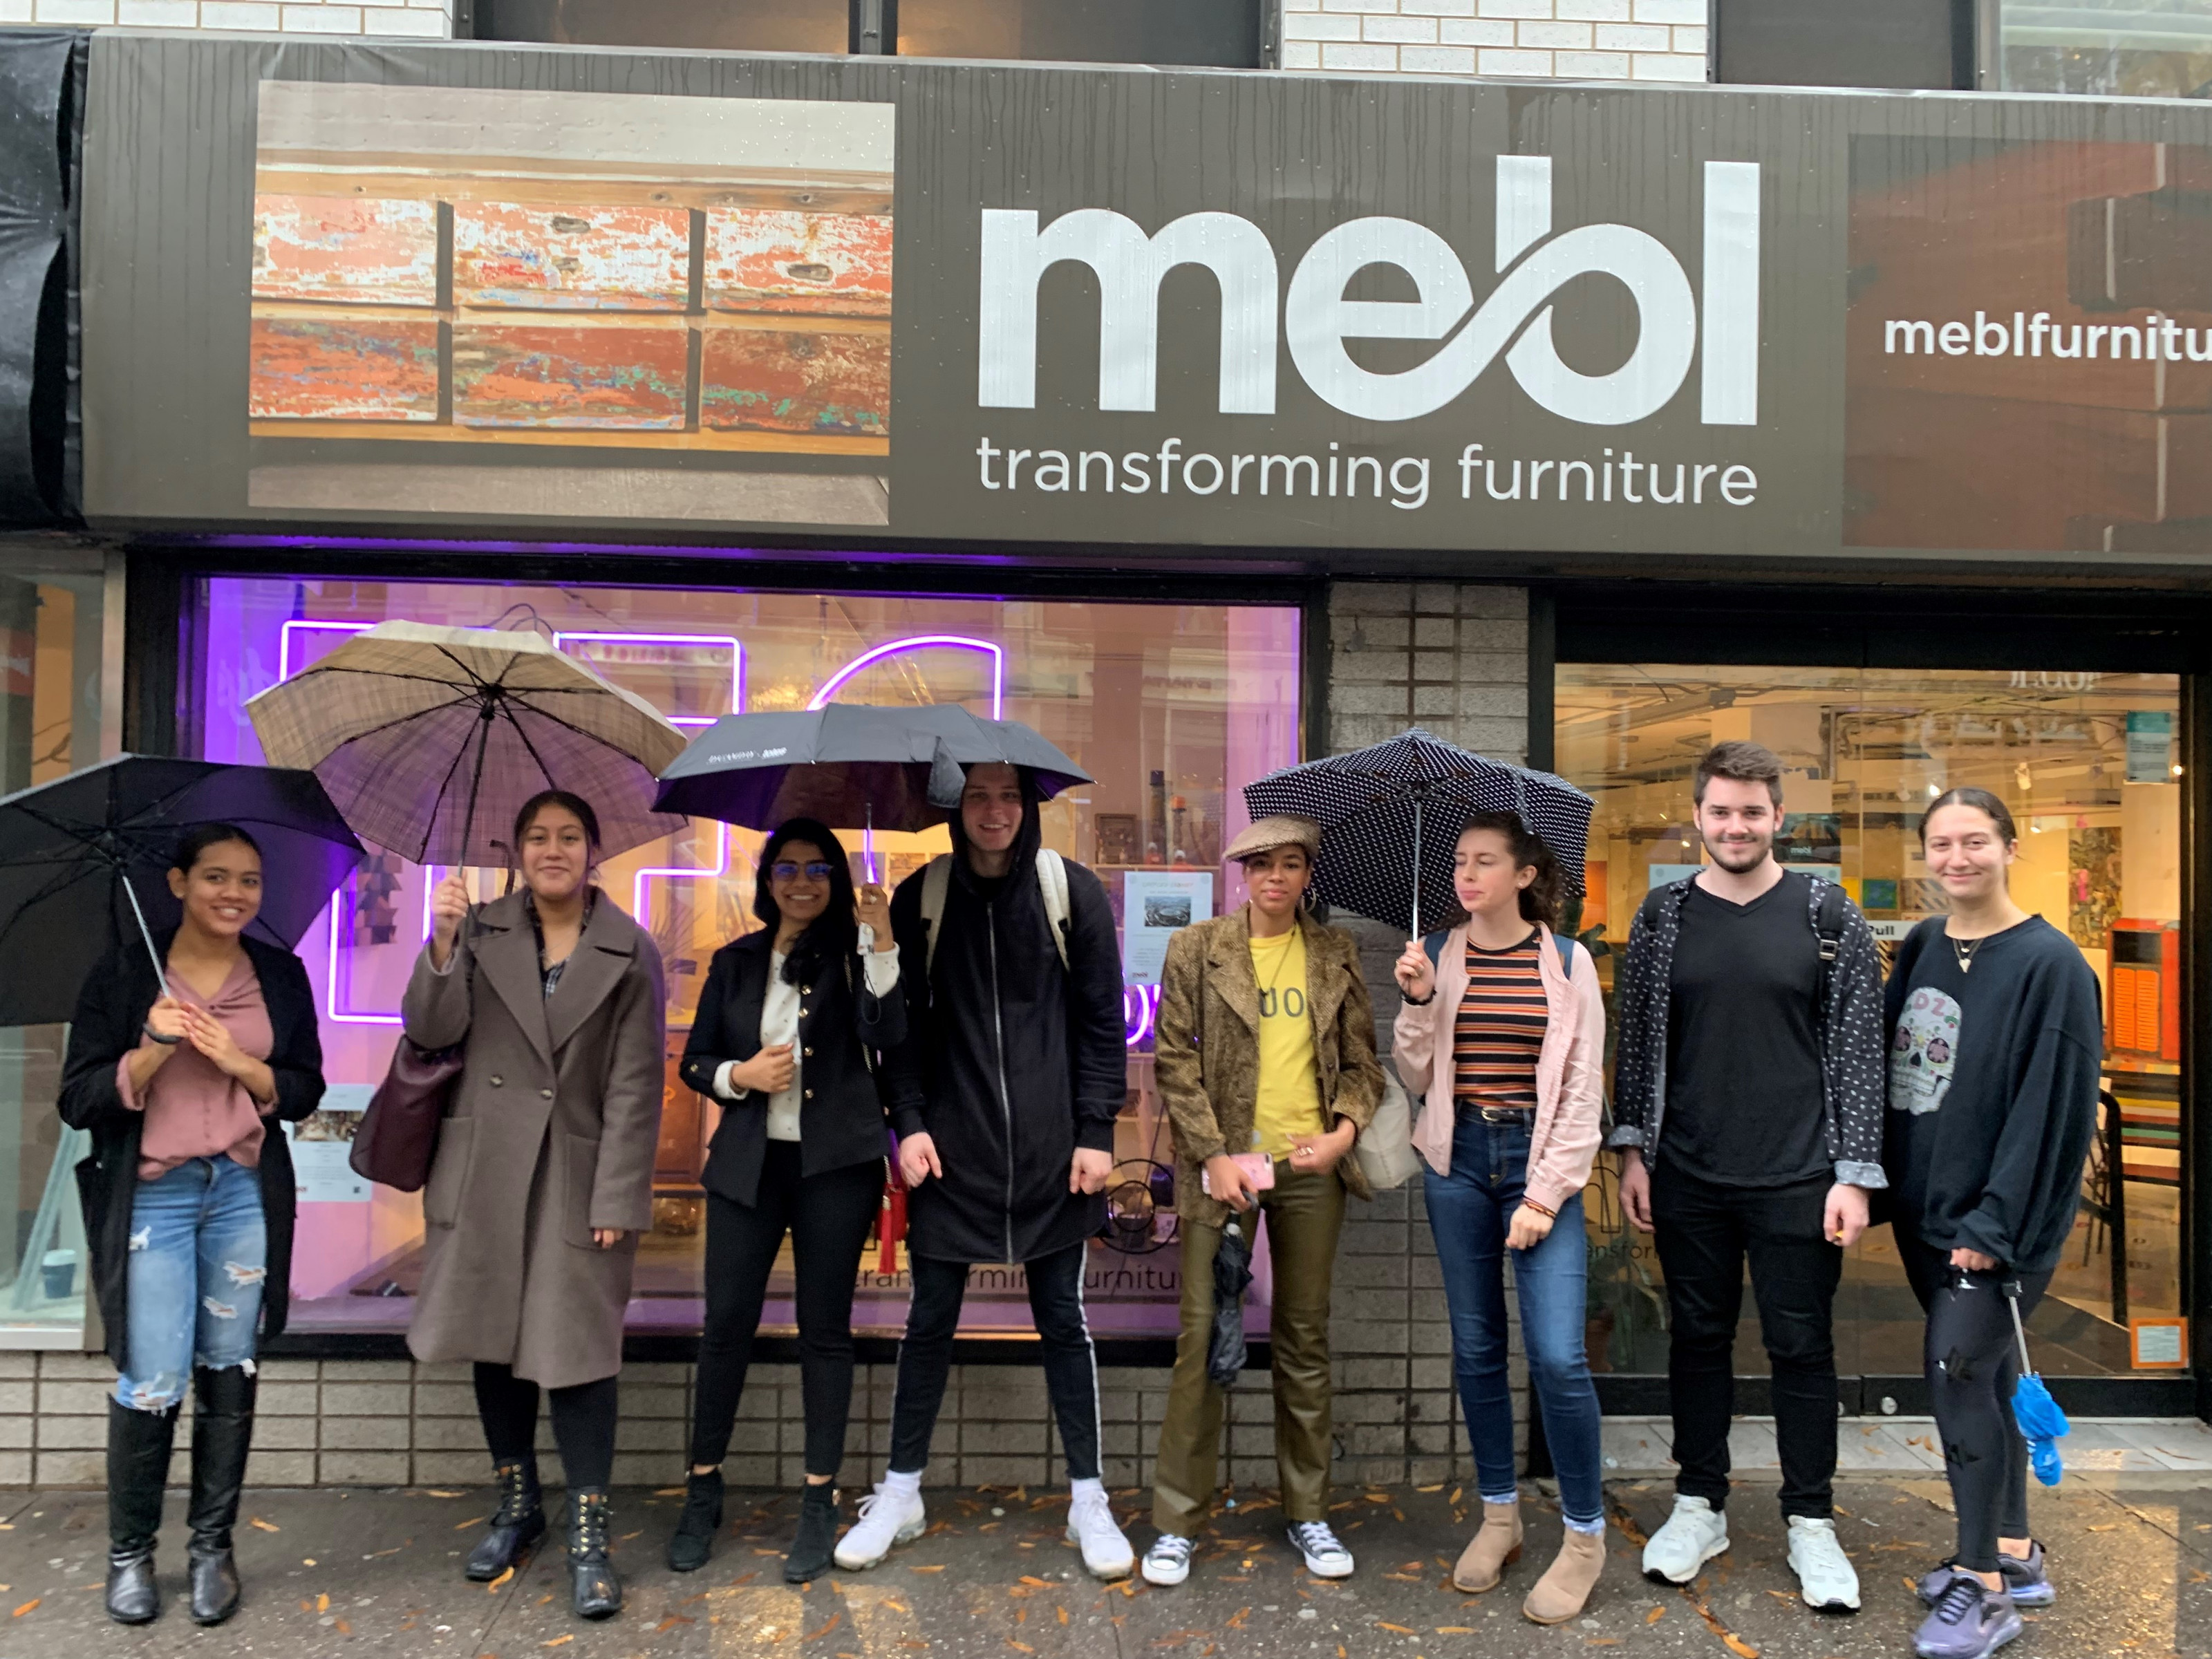 A rainy day didn't stop Prof. Chapman's Retail Management class from visiting mebl, a furniture store located at 7 East 14th Street. Stud...